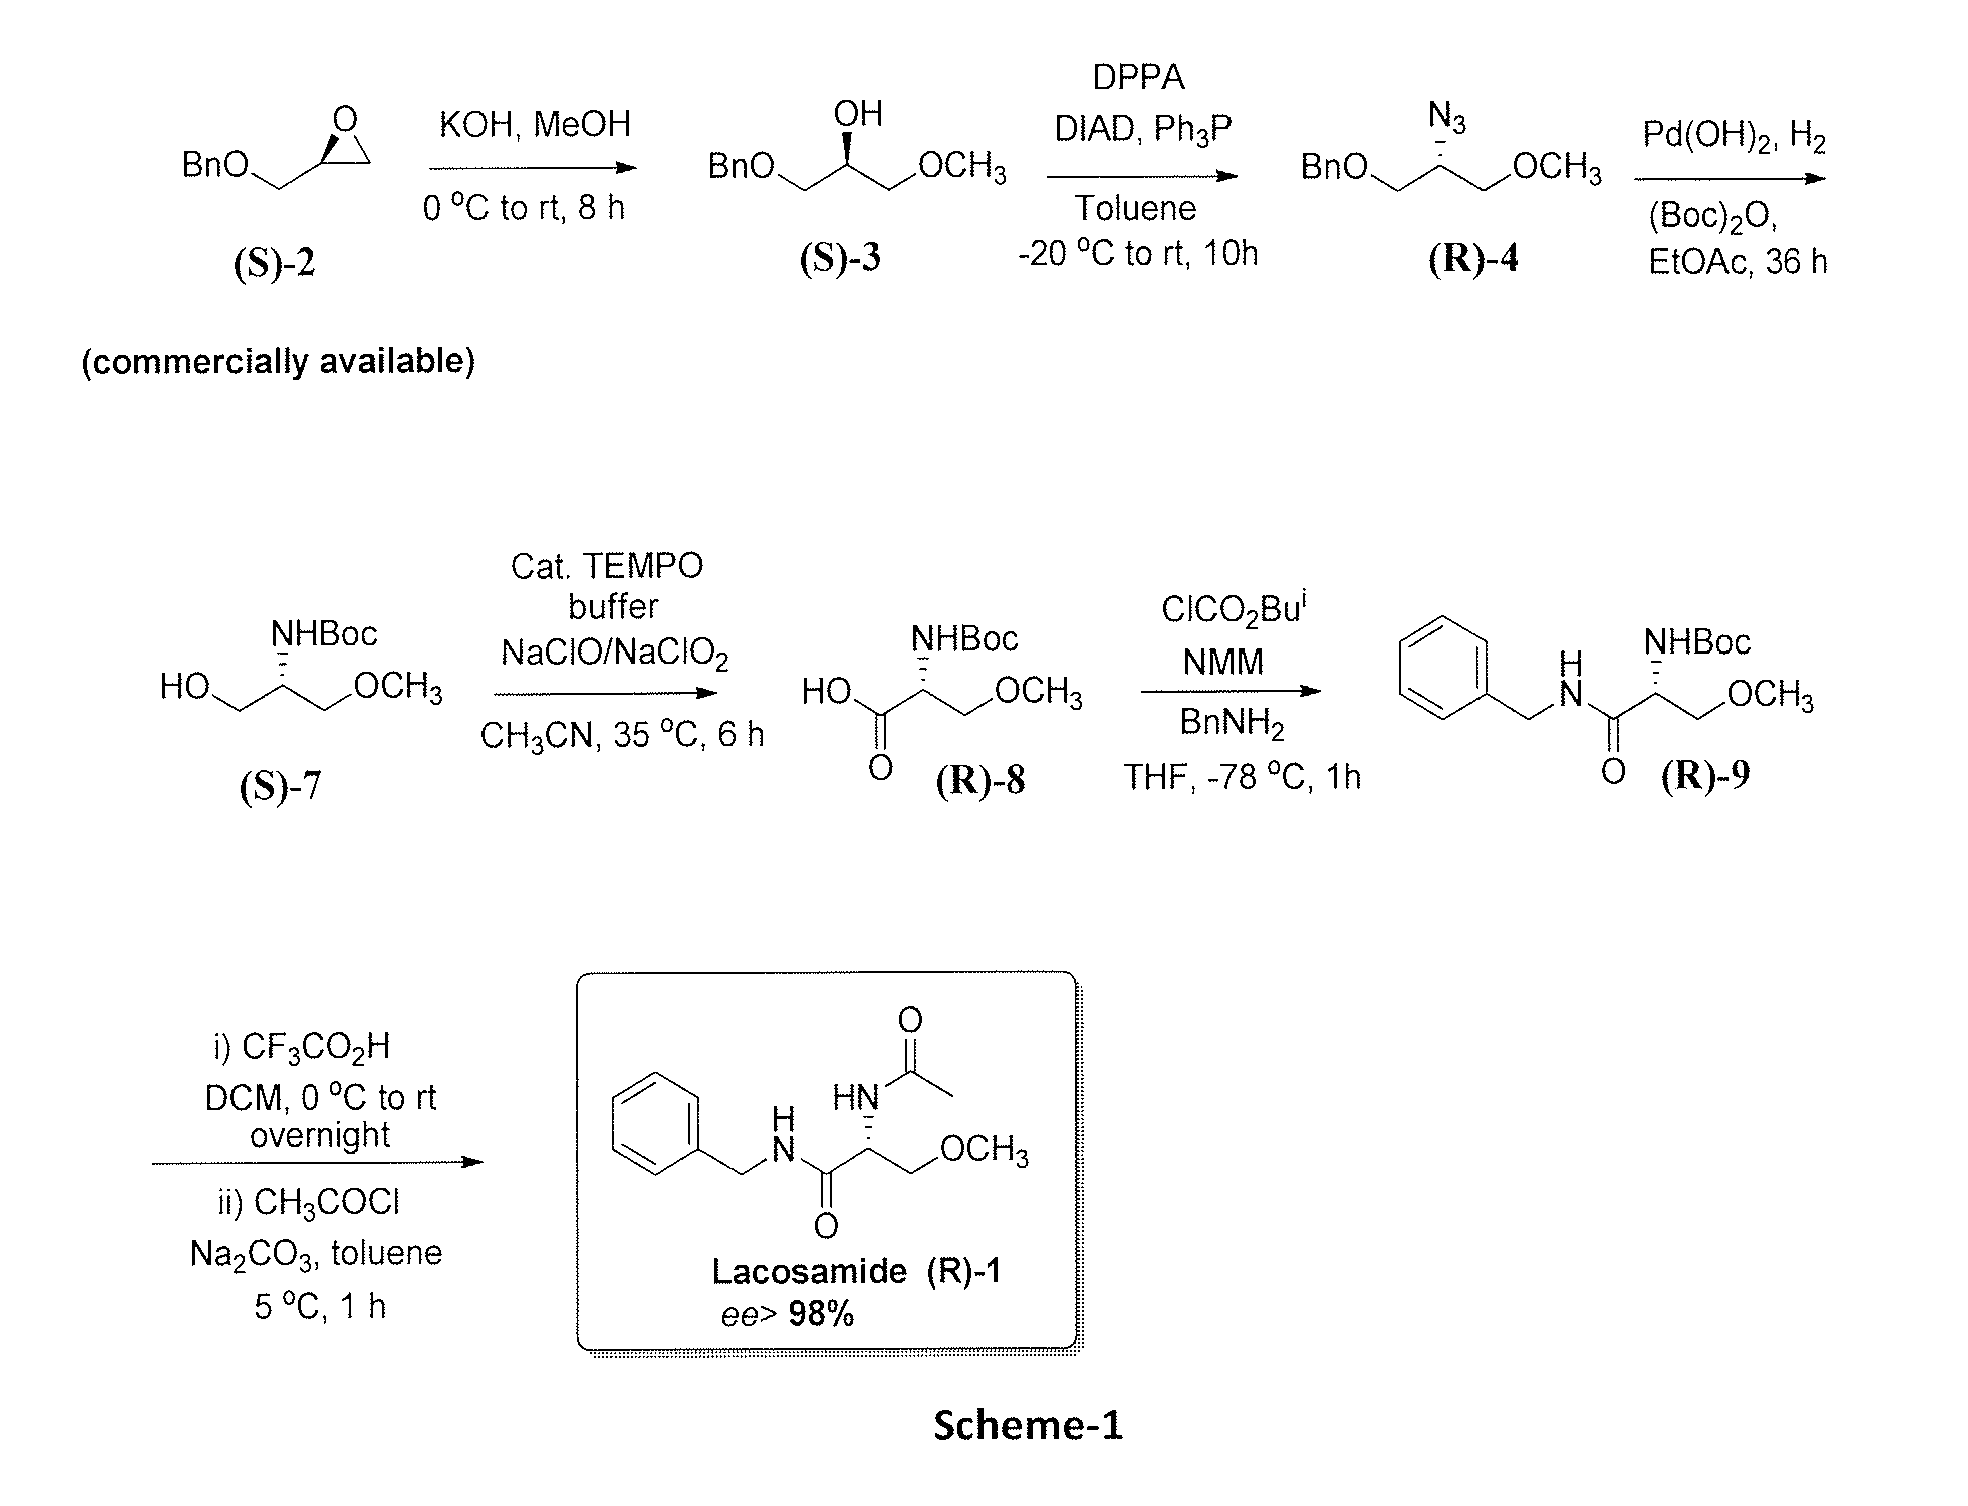 Process for the synthesis of antiepileptic drug lacosamide